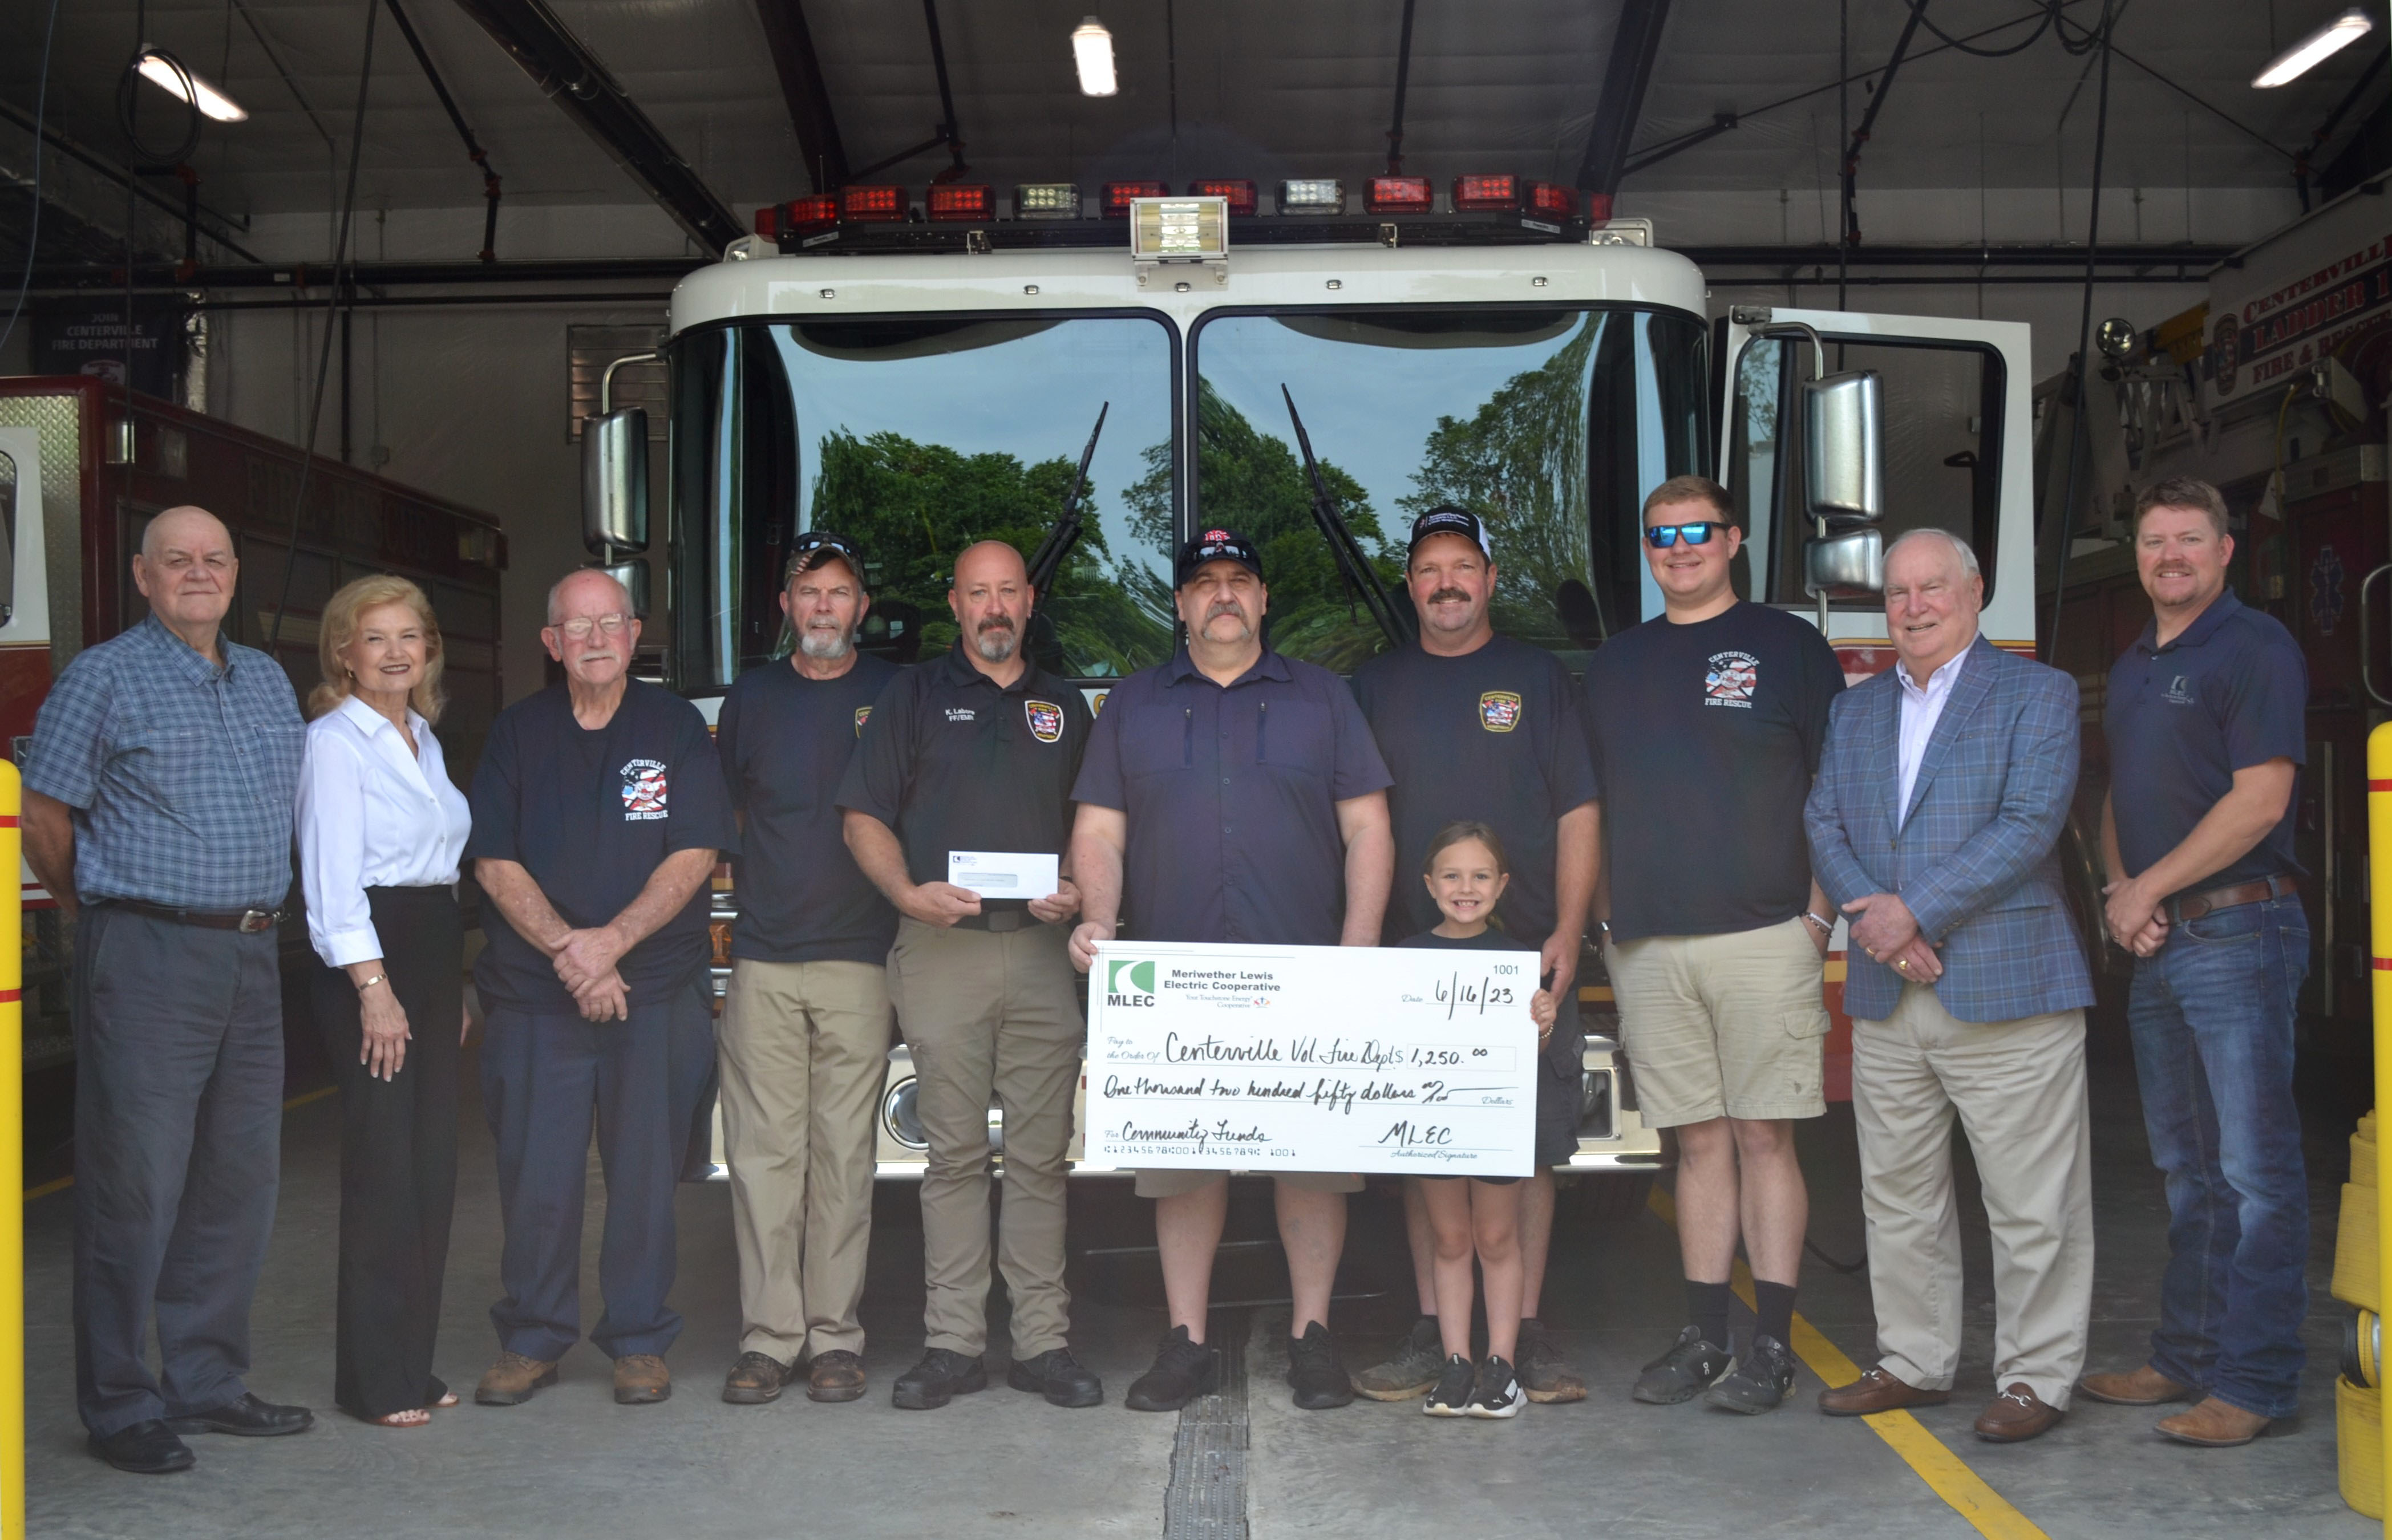 Pictured from left to right: MLEC Directors Wayne Qualls and Johnnie Ruth Elrod; Centerville Firefighters Charles Horner, Marvin Dorton, Kyle Labore, Jason Dotson, Centerville Fire Captain Greg Johnston and granddaughter Tinslee, and Firefighter McKale Baltz; MLEC Director Dr. Zack Hutchens, and District Manager Matthew Chessor